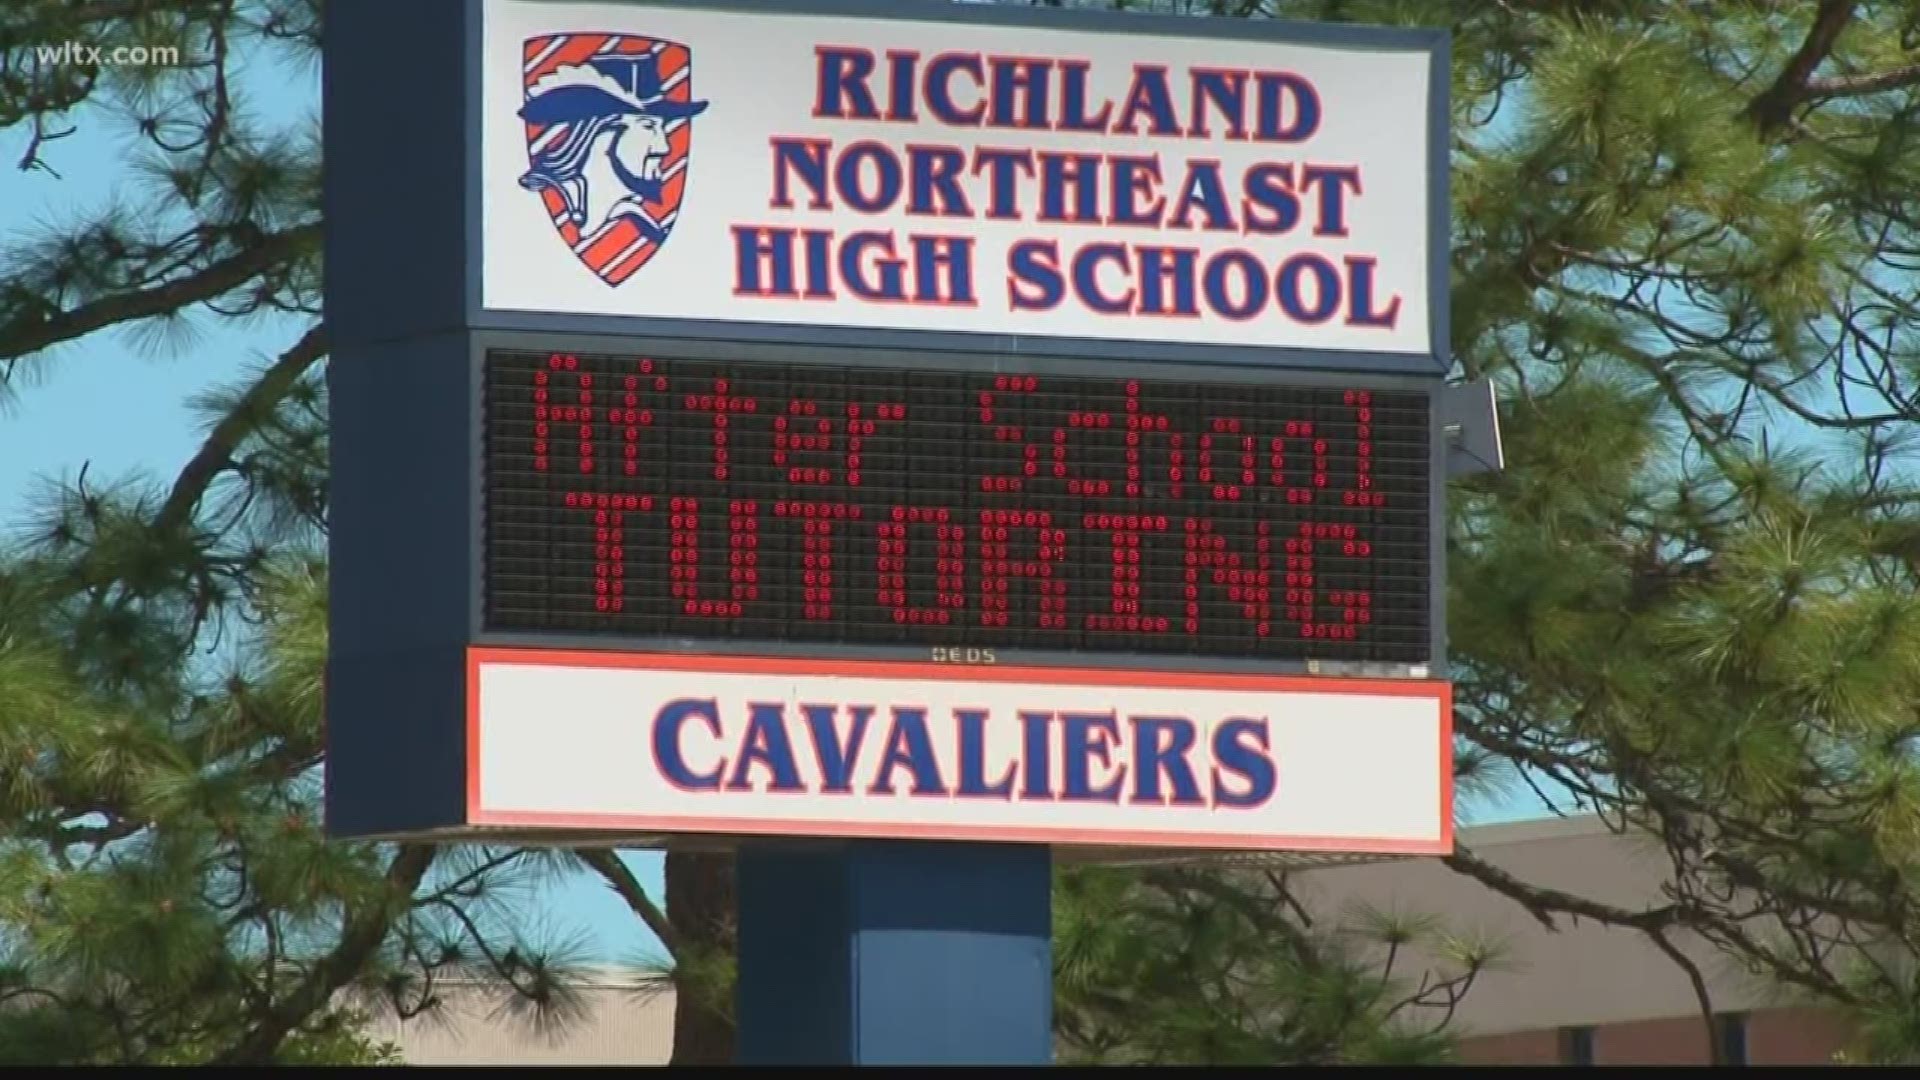 Richland County deputies said two students have been arrested after a fight at Richland Northeast High School.